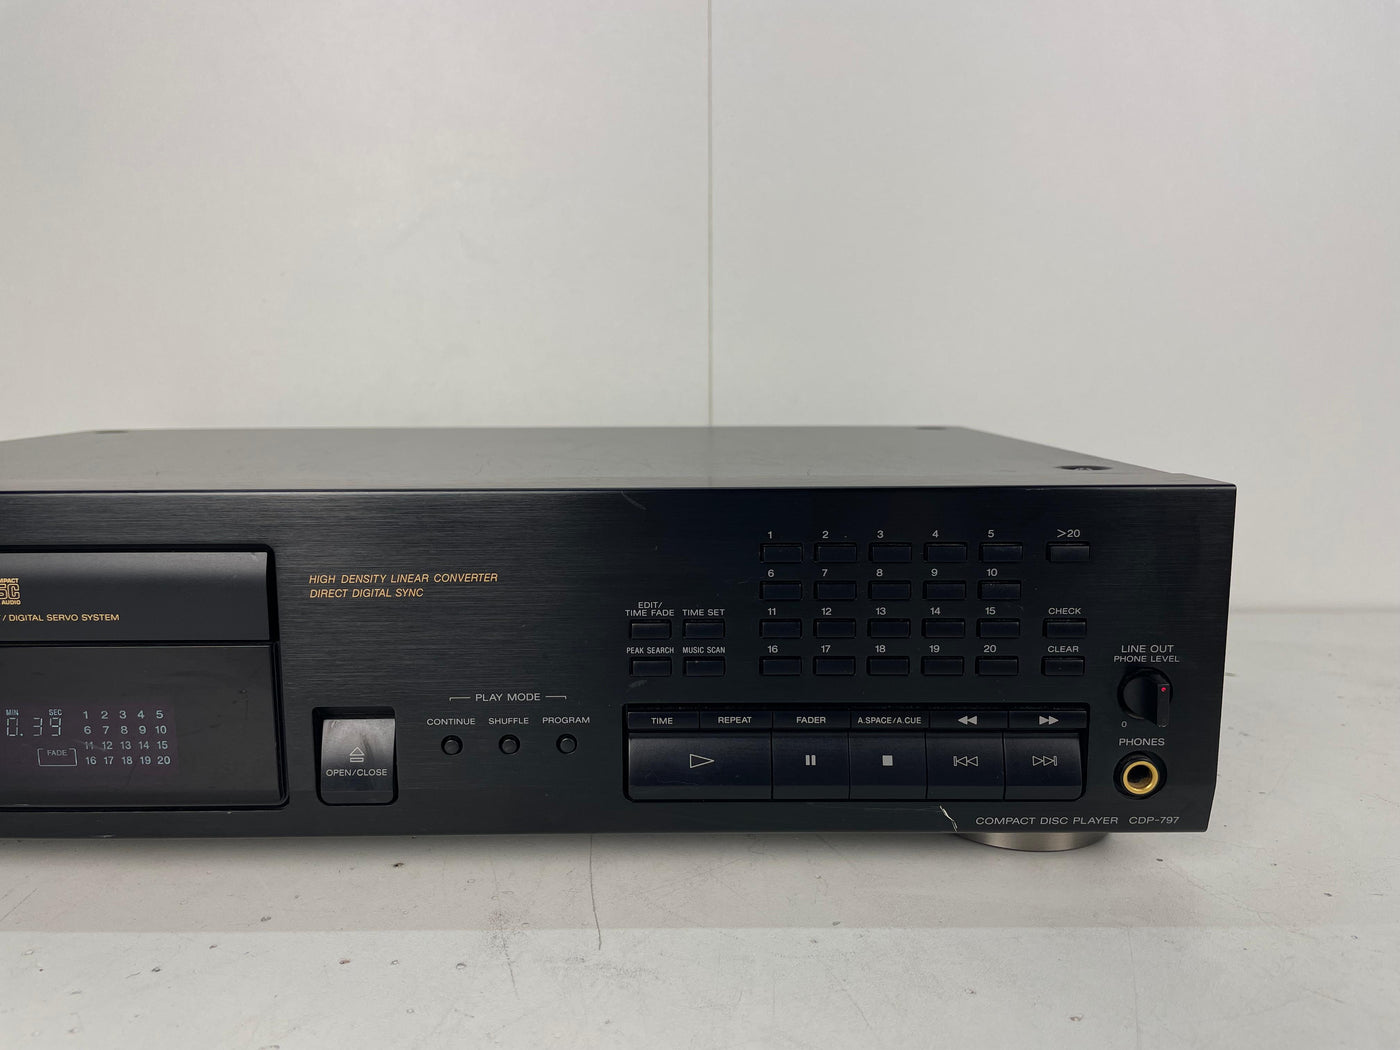 Sony CDP-797 Stereo Compact Disc Player